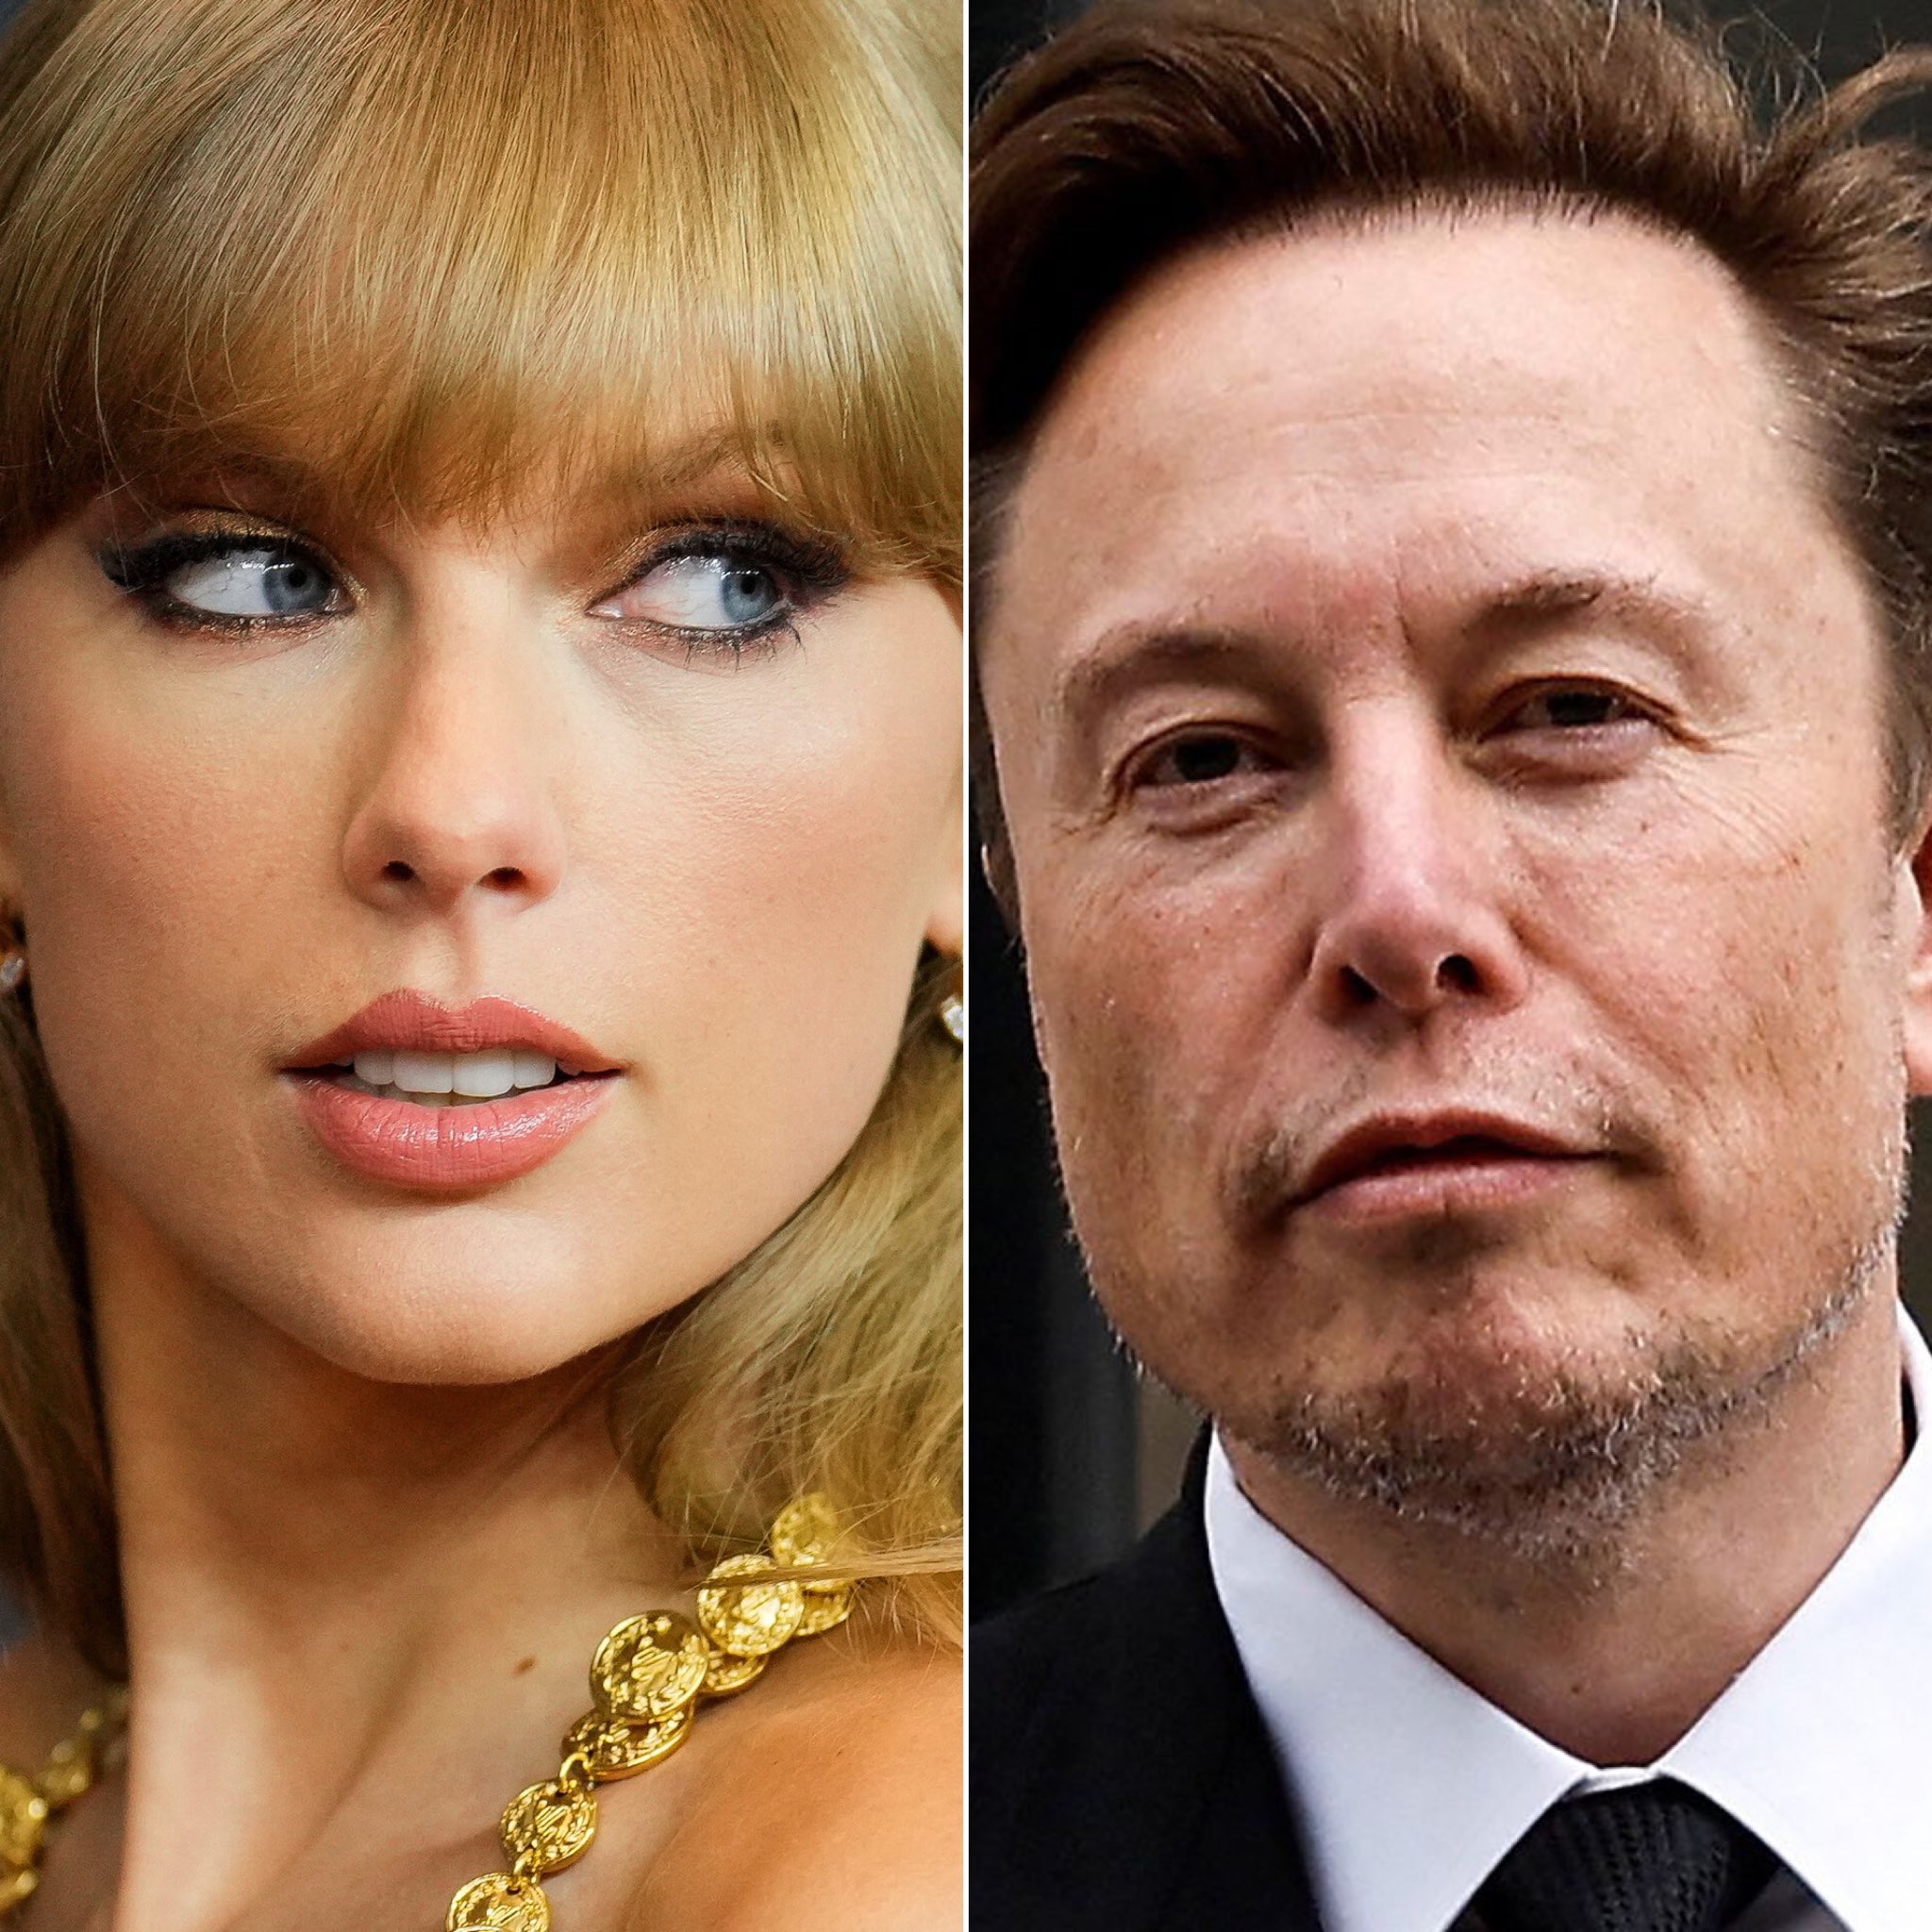 Pop Crave on X: "Elon Musk interacts with Taylor Swift in new tweet. https://t.co/Vn4kMpuvJO" / X